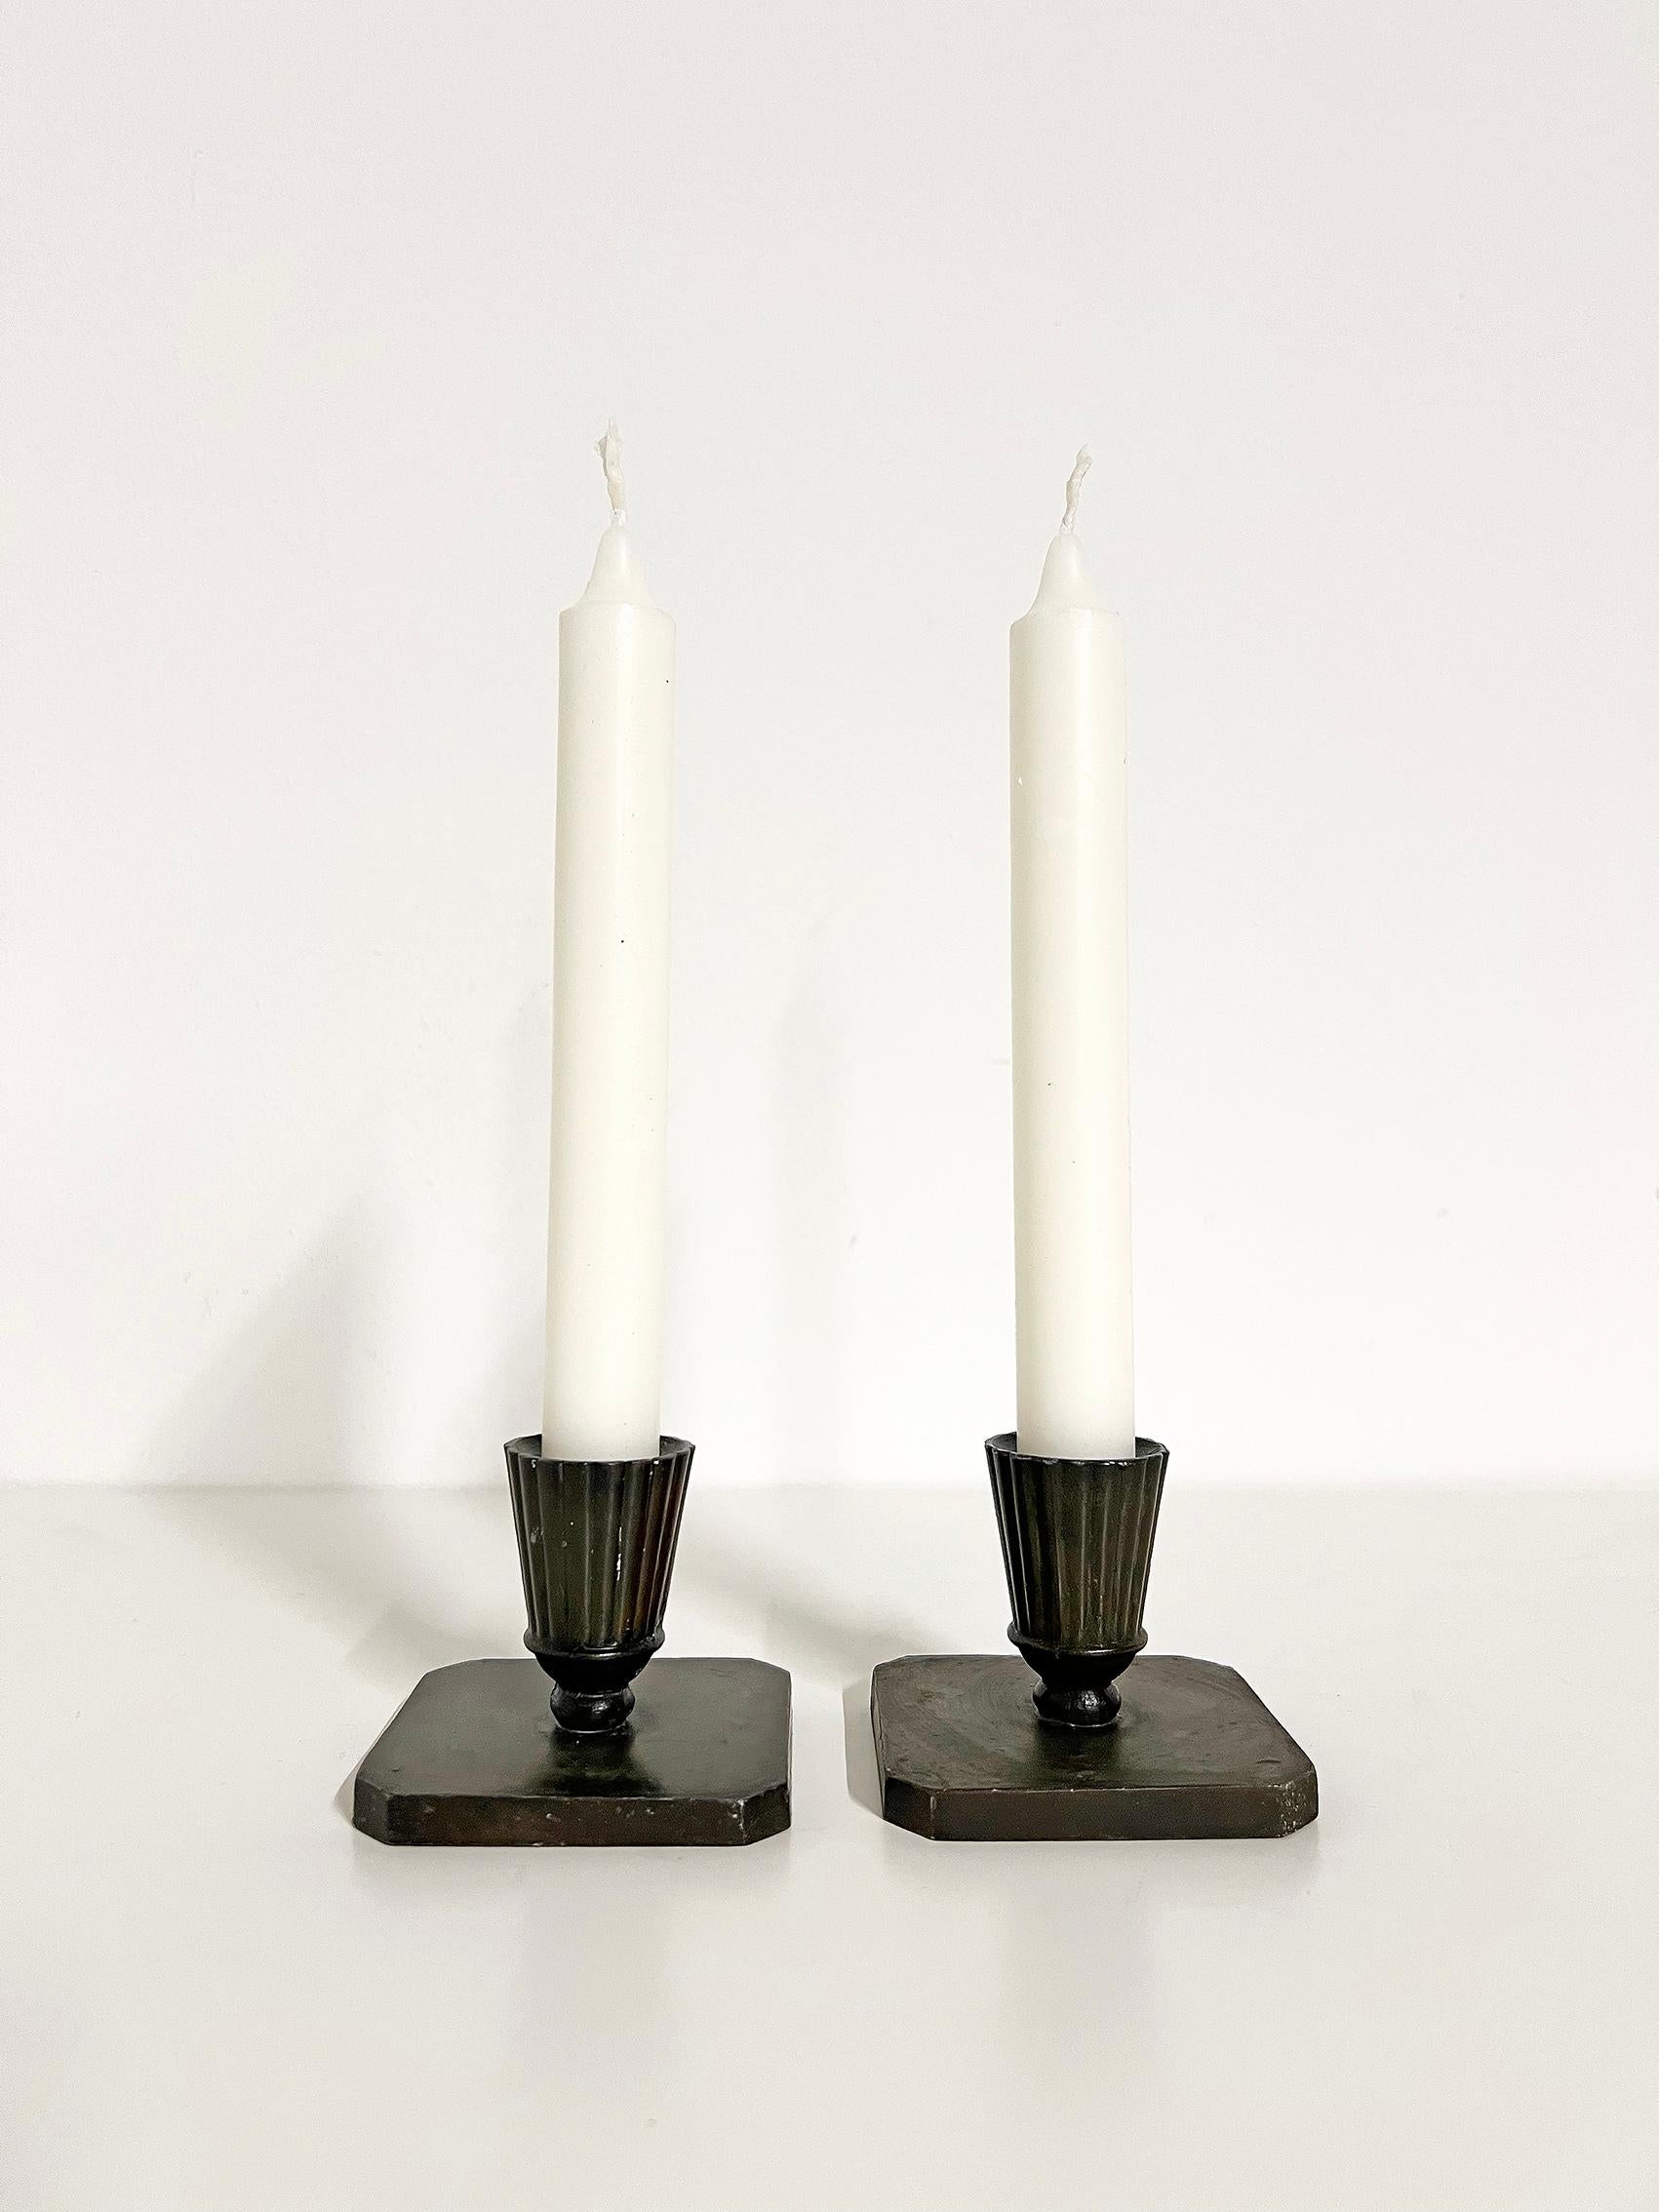 Swedish Scandinavian Modern Pair of Candle Holders In Bronze ca 1930-40's For Sale